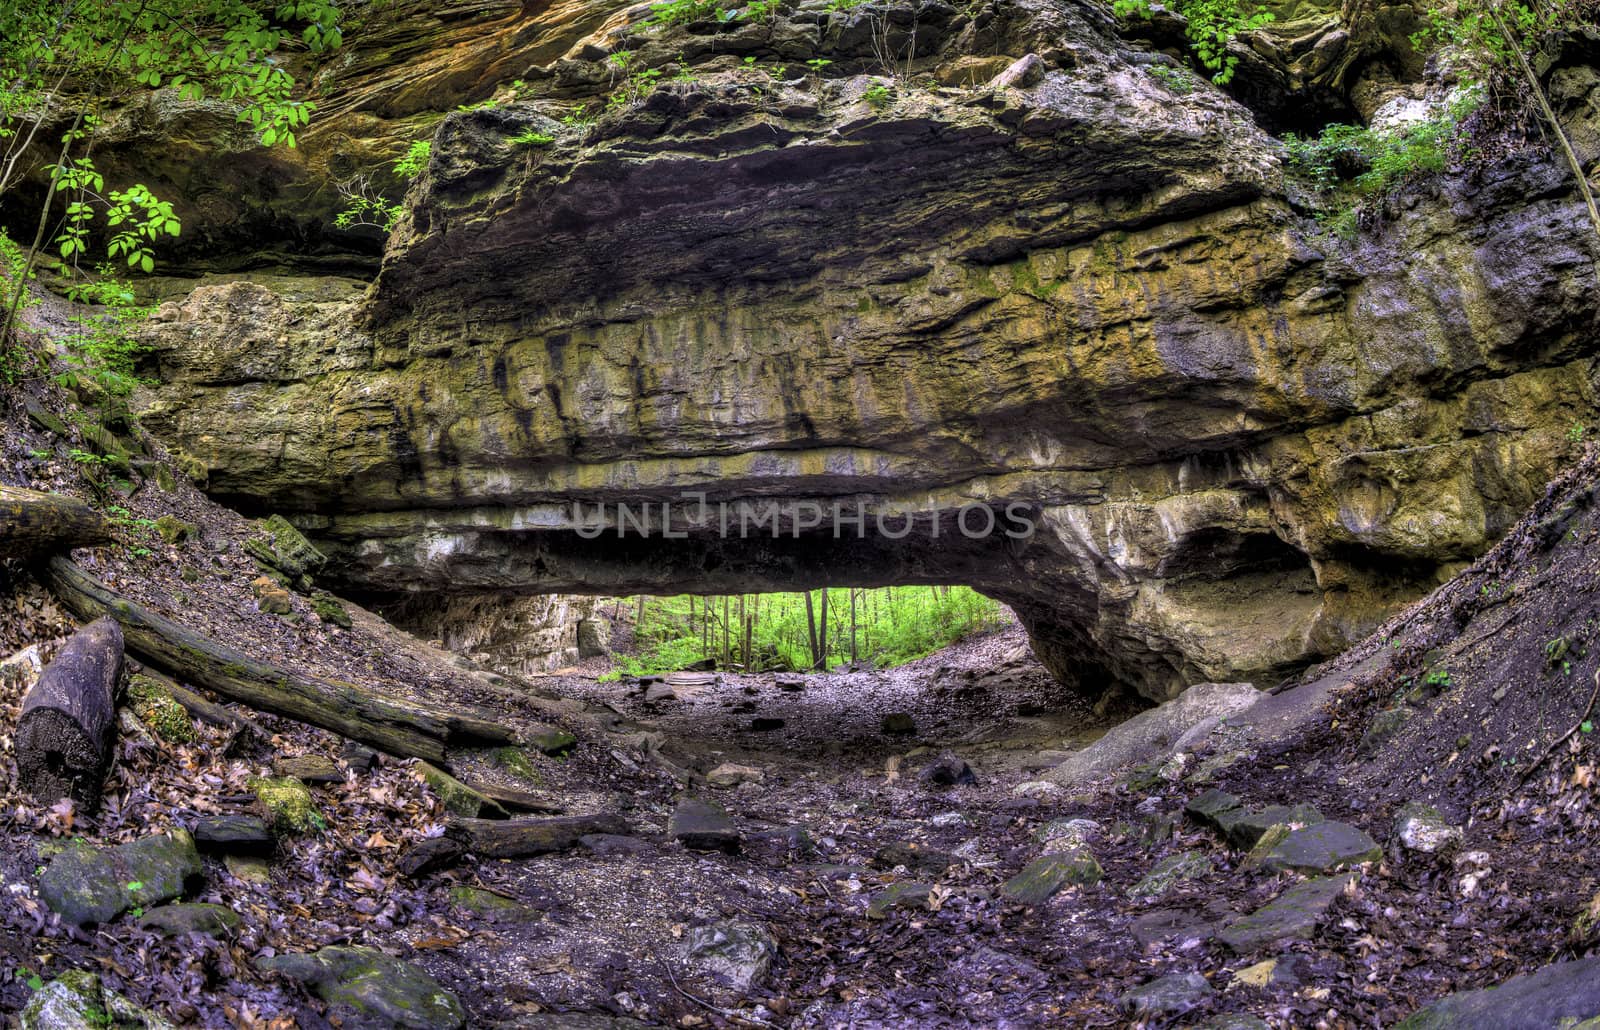 A wide angle shot of a natural rock bridge in a forest.